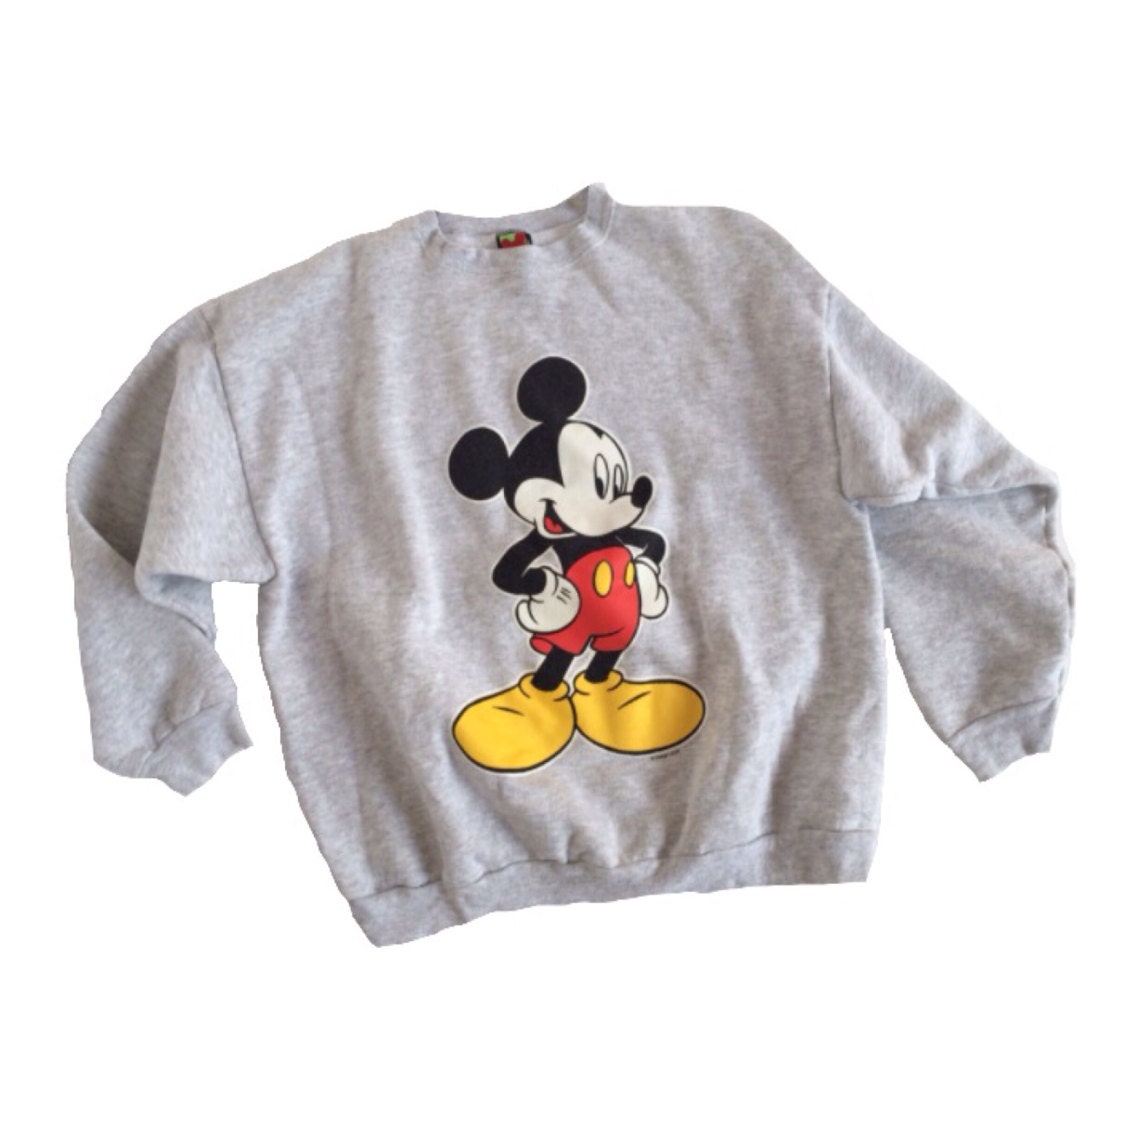 Vintage 80s 90s Mickey Mouse Classic Sweatshirt by LittleLoco